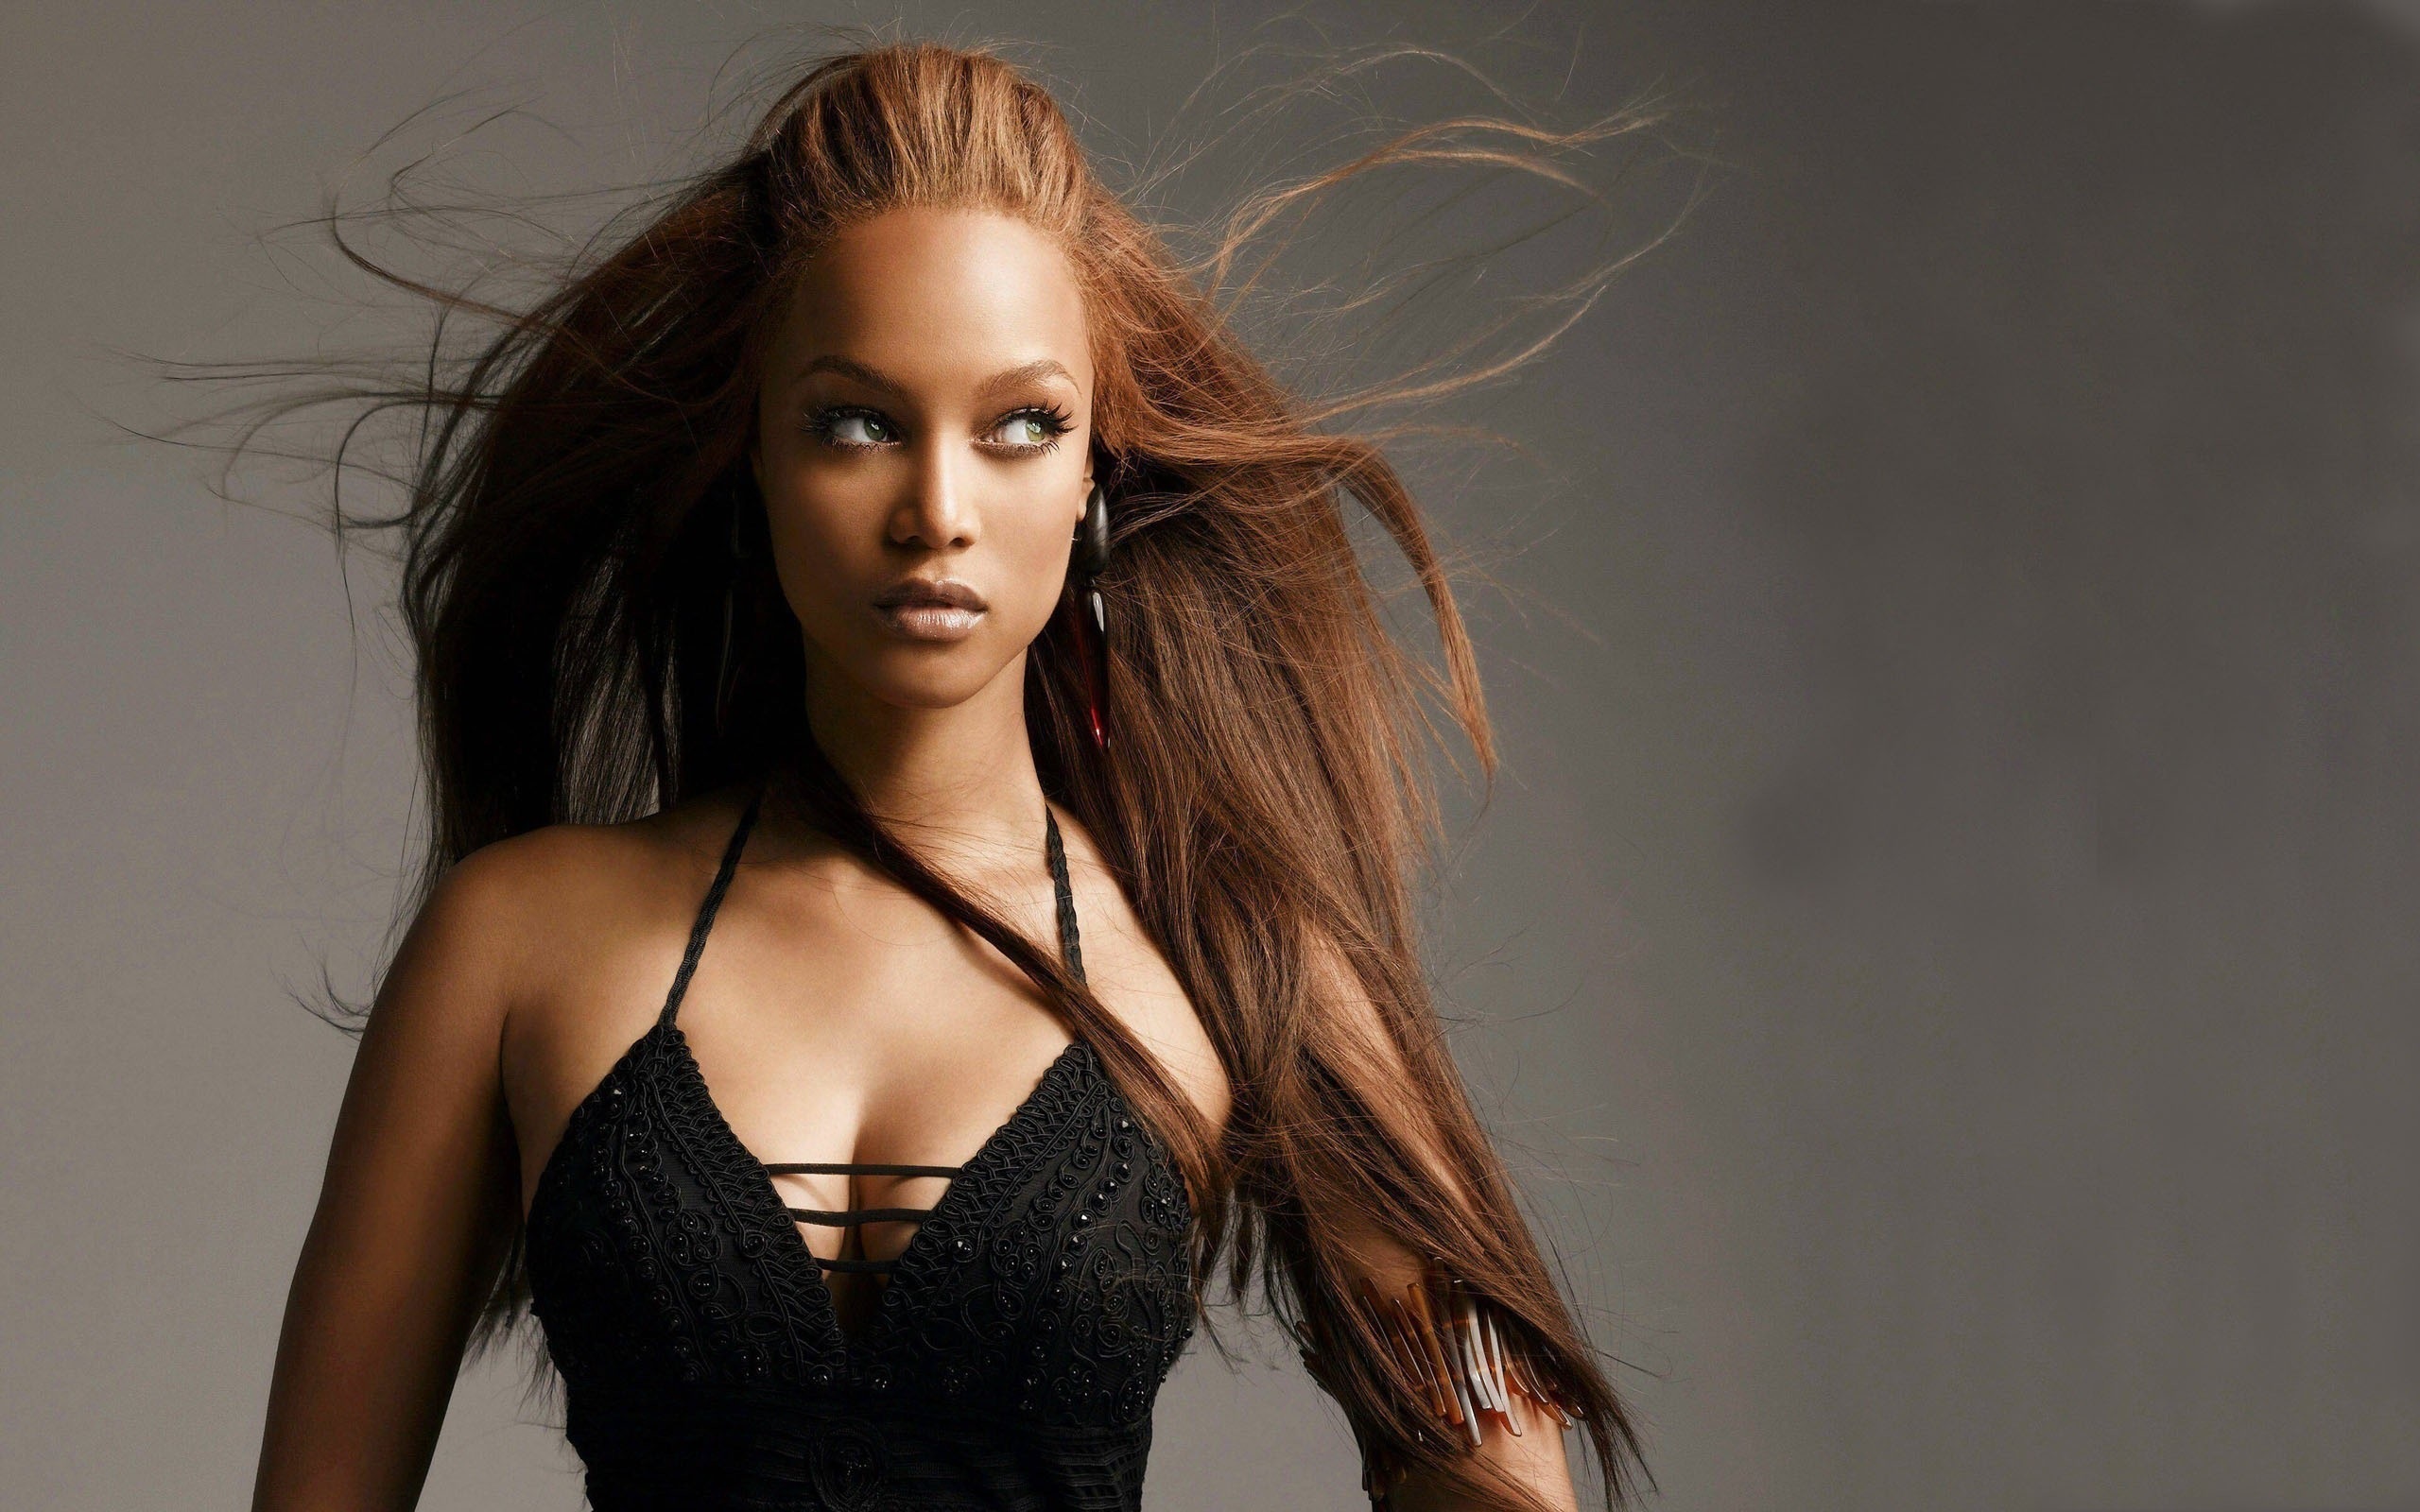 Tyra Banks Wallpaper Image Photos Pictures Background